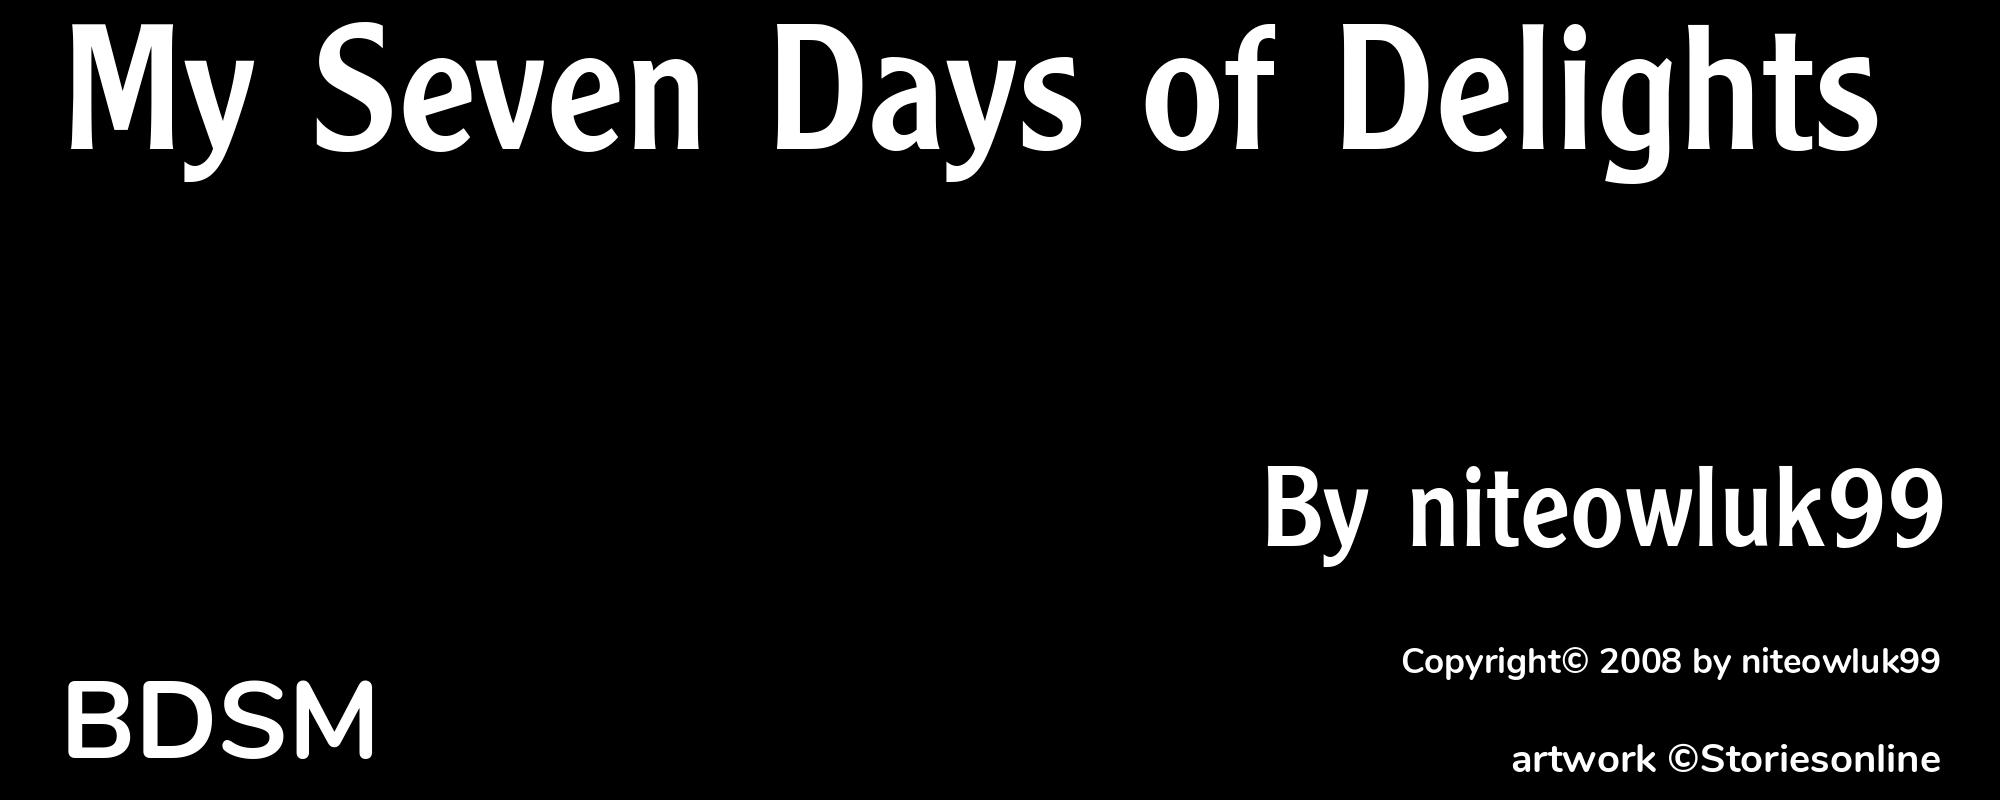 My Seven Days of Delights - Cover